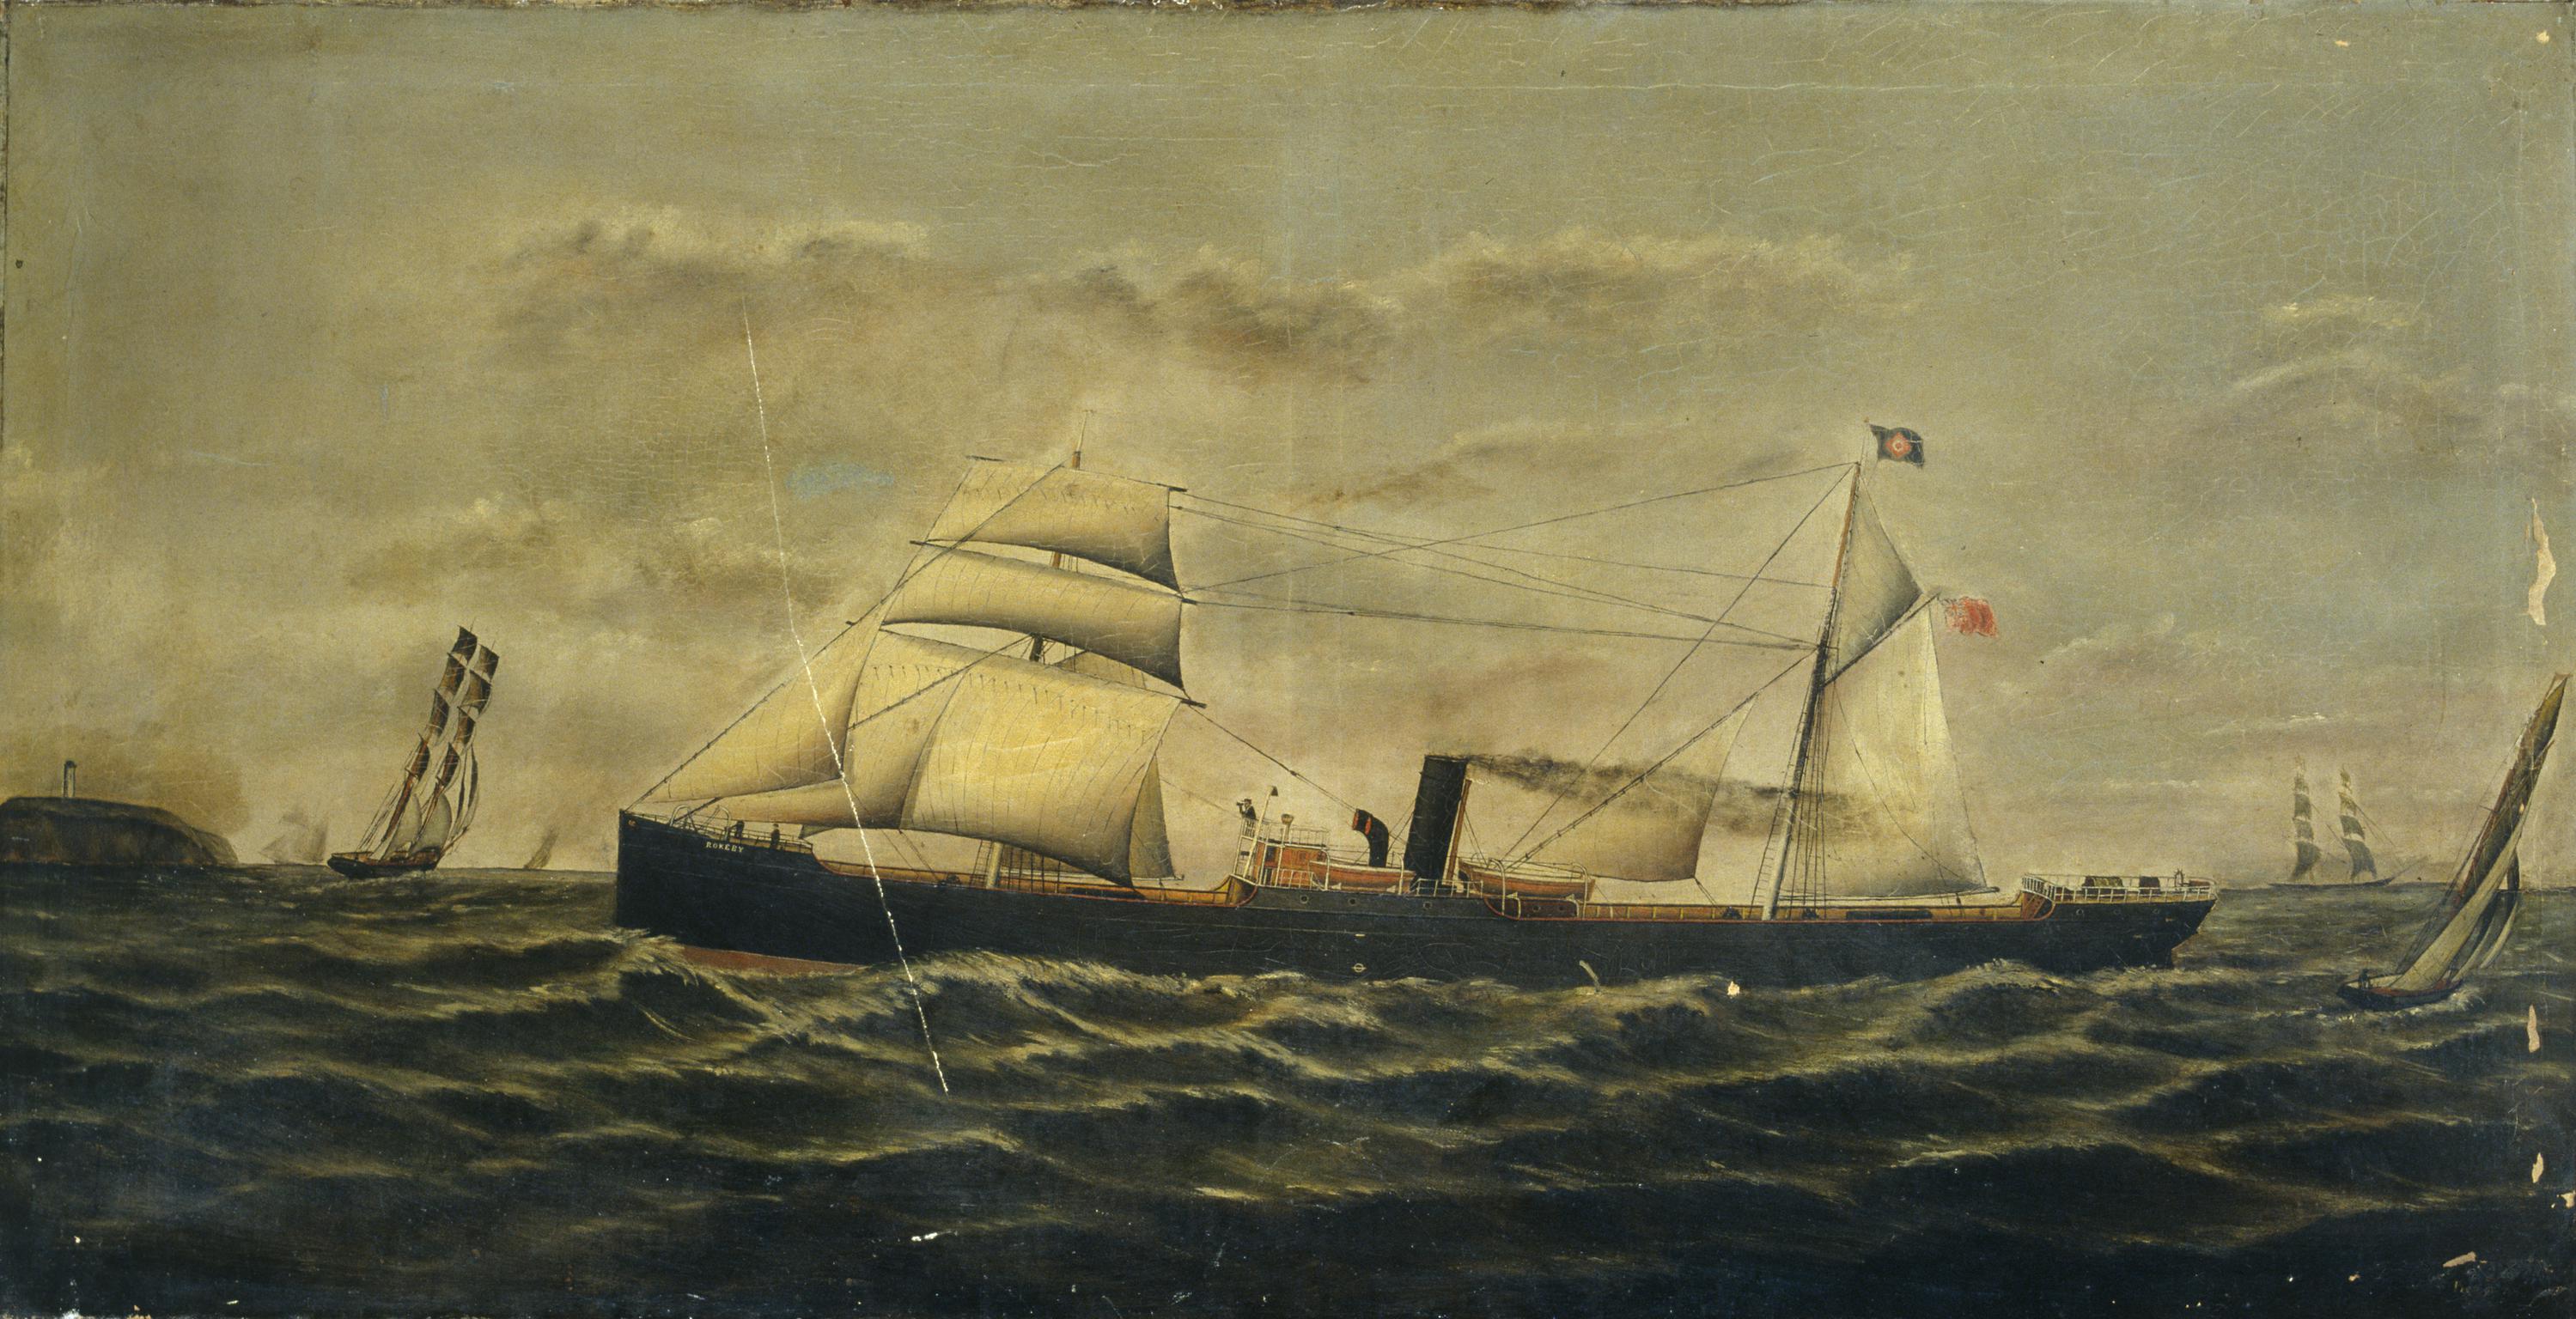 S.S. ROKEBY (painting)